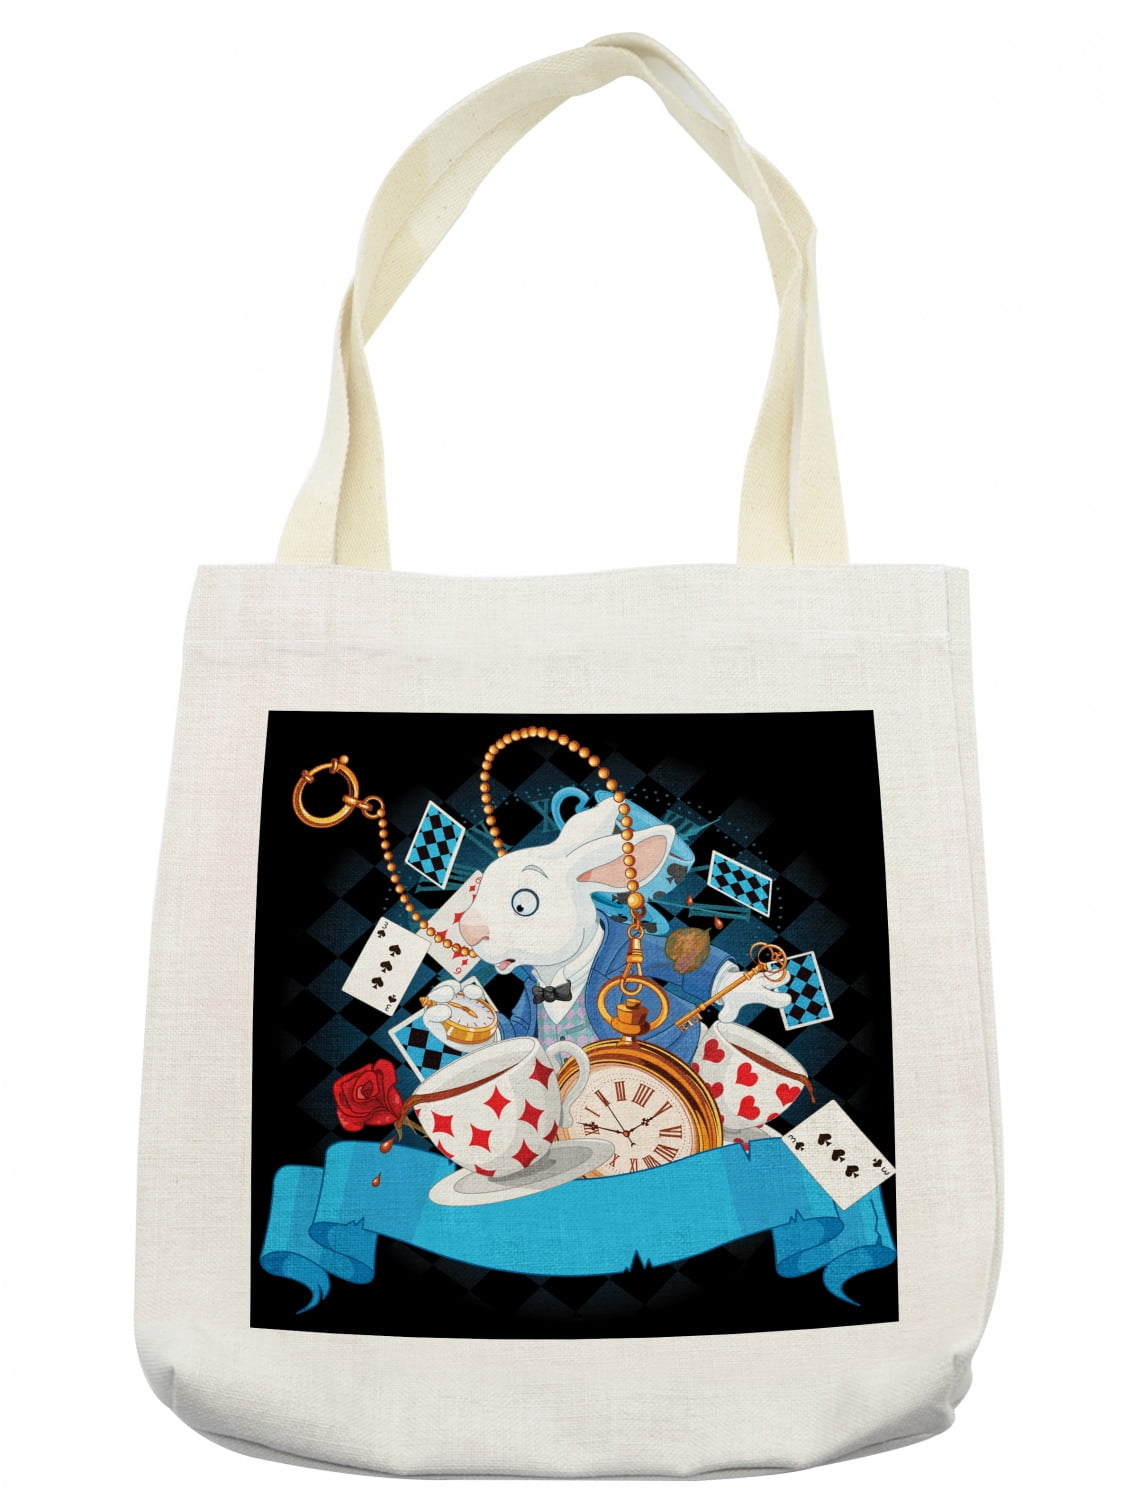 Alice in Wonderland Tote Bag, Rabbit Motion Cups Hearts and Flower